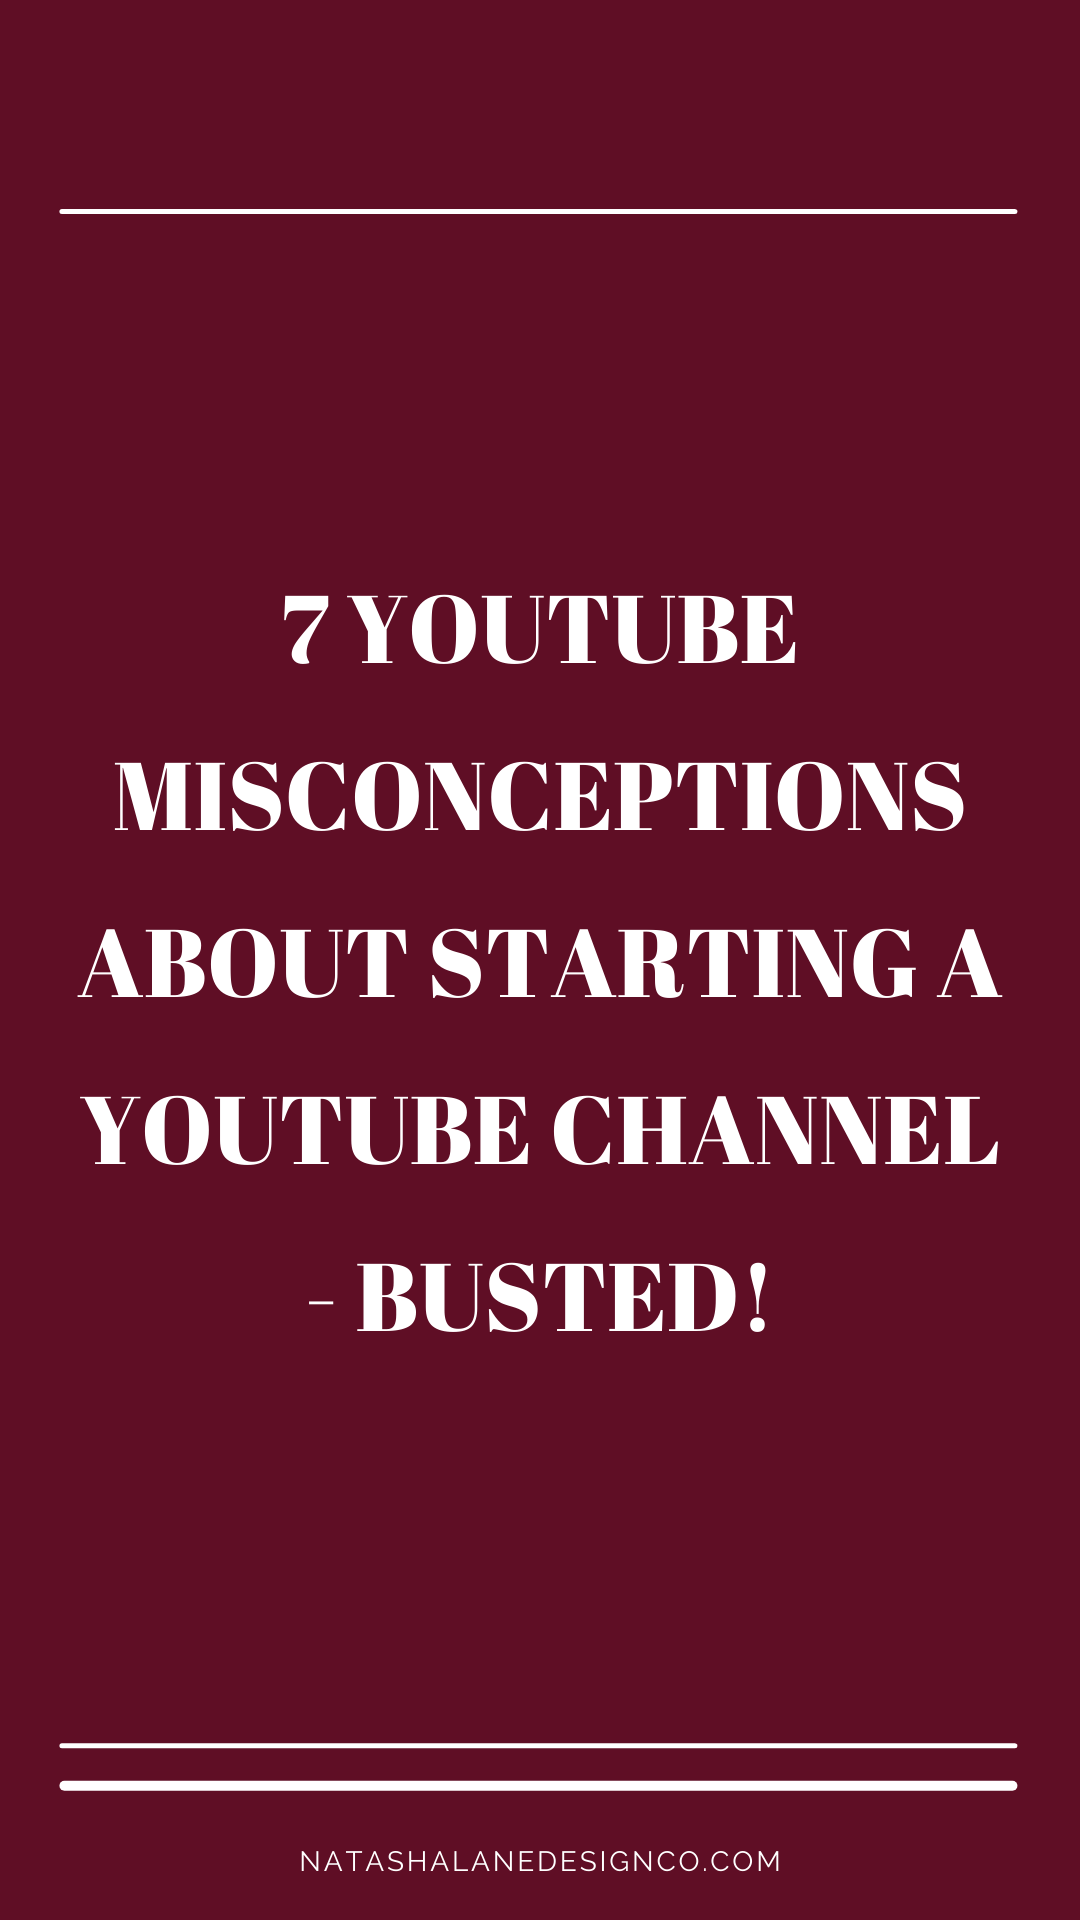 7 YouTube misconceptions about starting a YouTube channel - busted! (4)